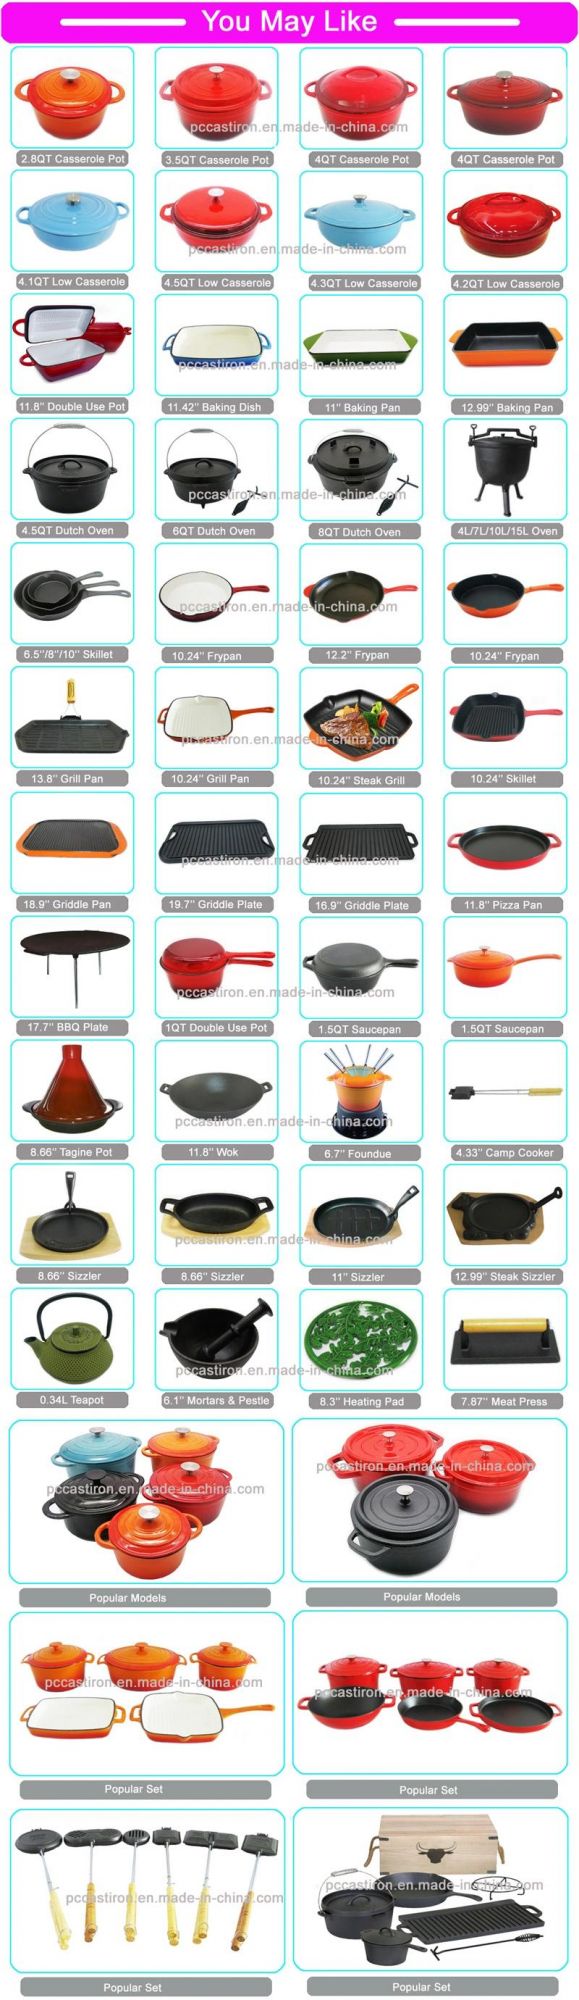 Beautiful Marble Mortar and Pestle Supplier in China